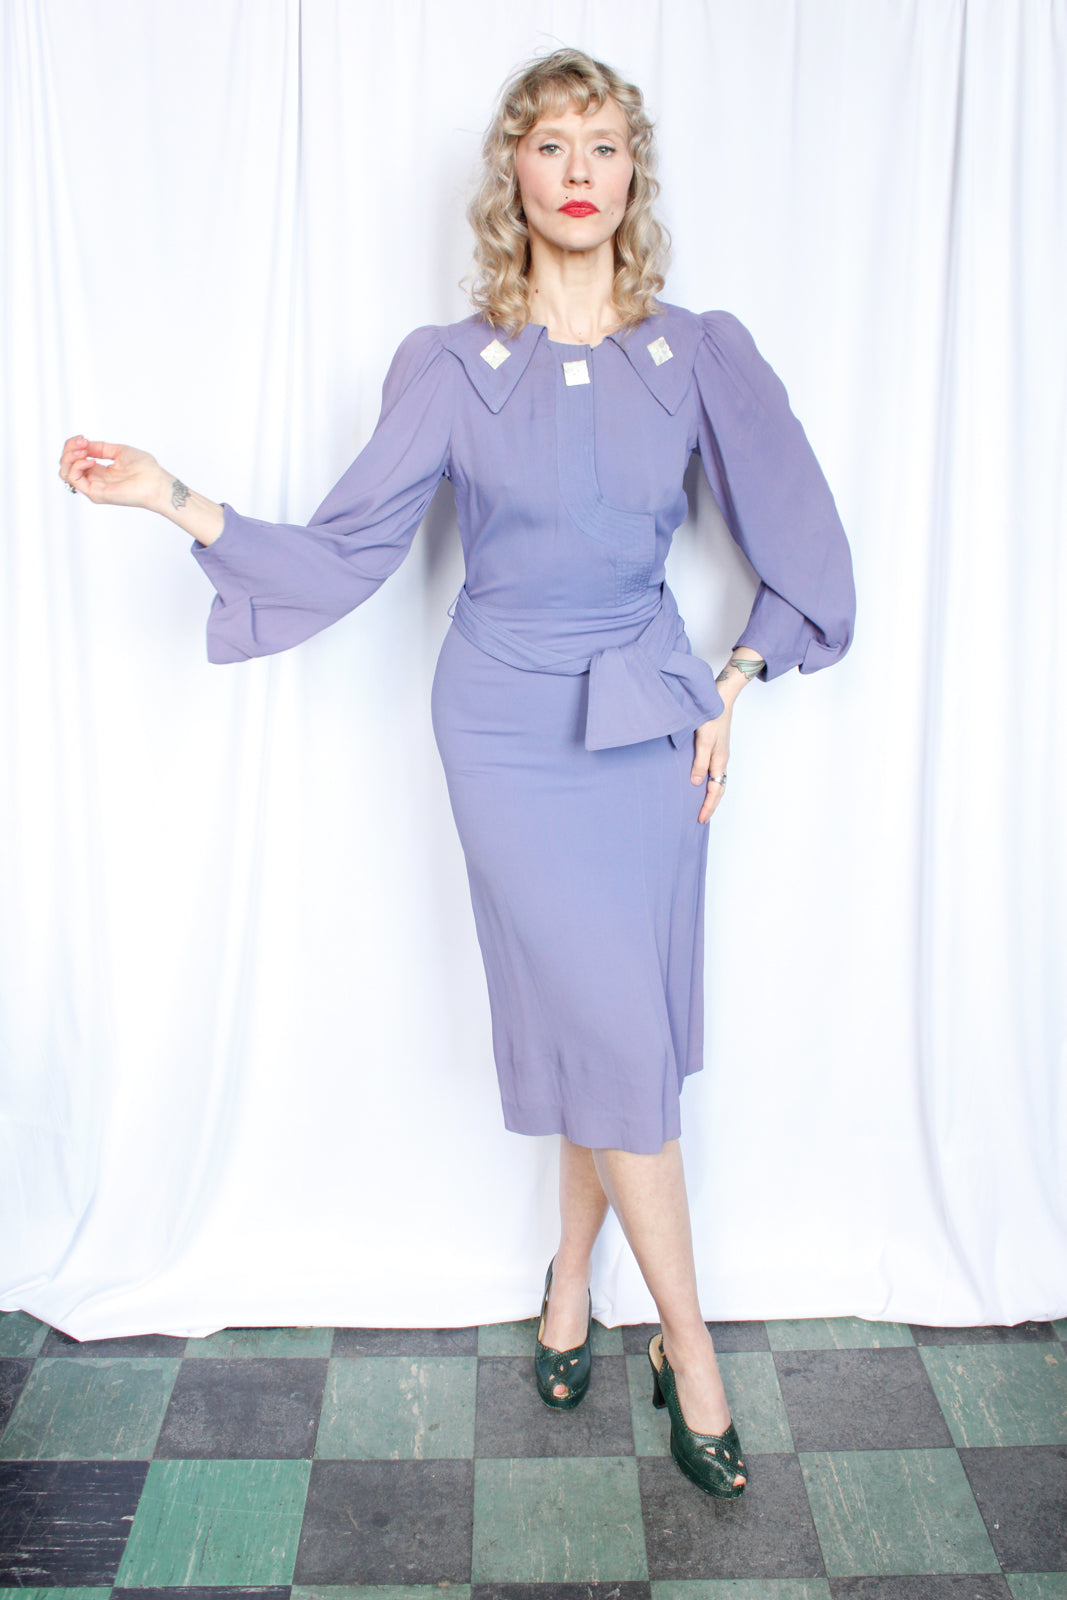 1930s Lovely Lavender Rayon Dress - Small